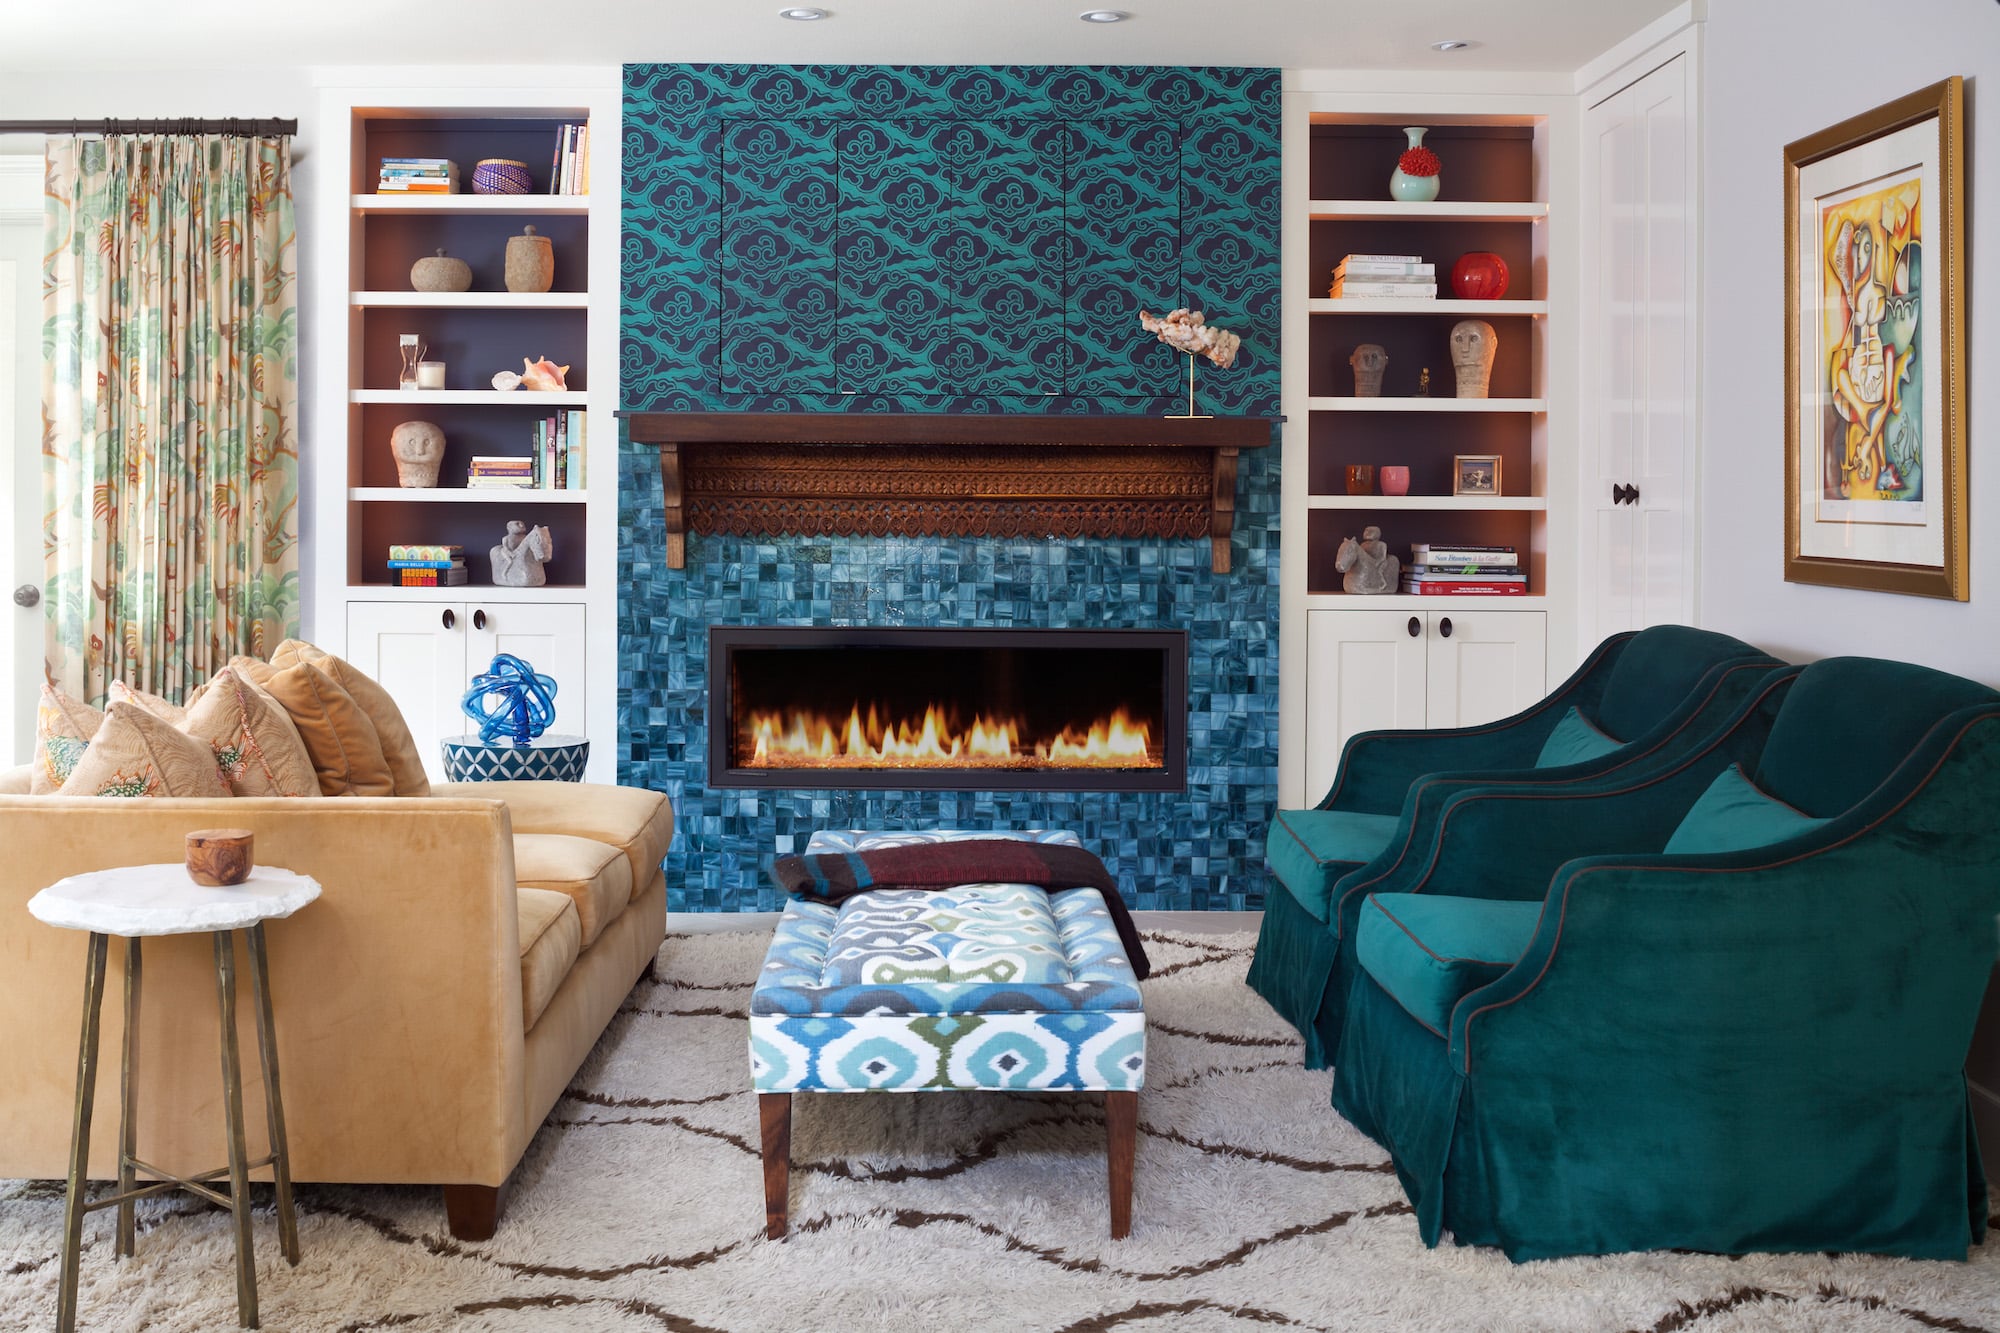 A Phillip Jeffries wallpaper helps to make the hearth a conversation starter. Carleton V’s Puff drapery fabric and a Tibetan Wave shag rug from David E. Adler lend quieter patterns in the background. Photo by Emily Minton Redfield